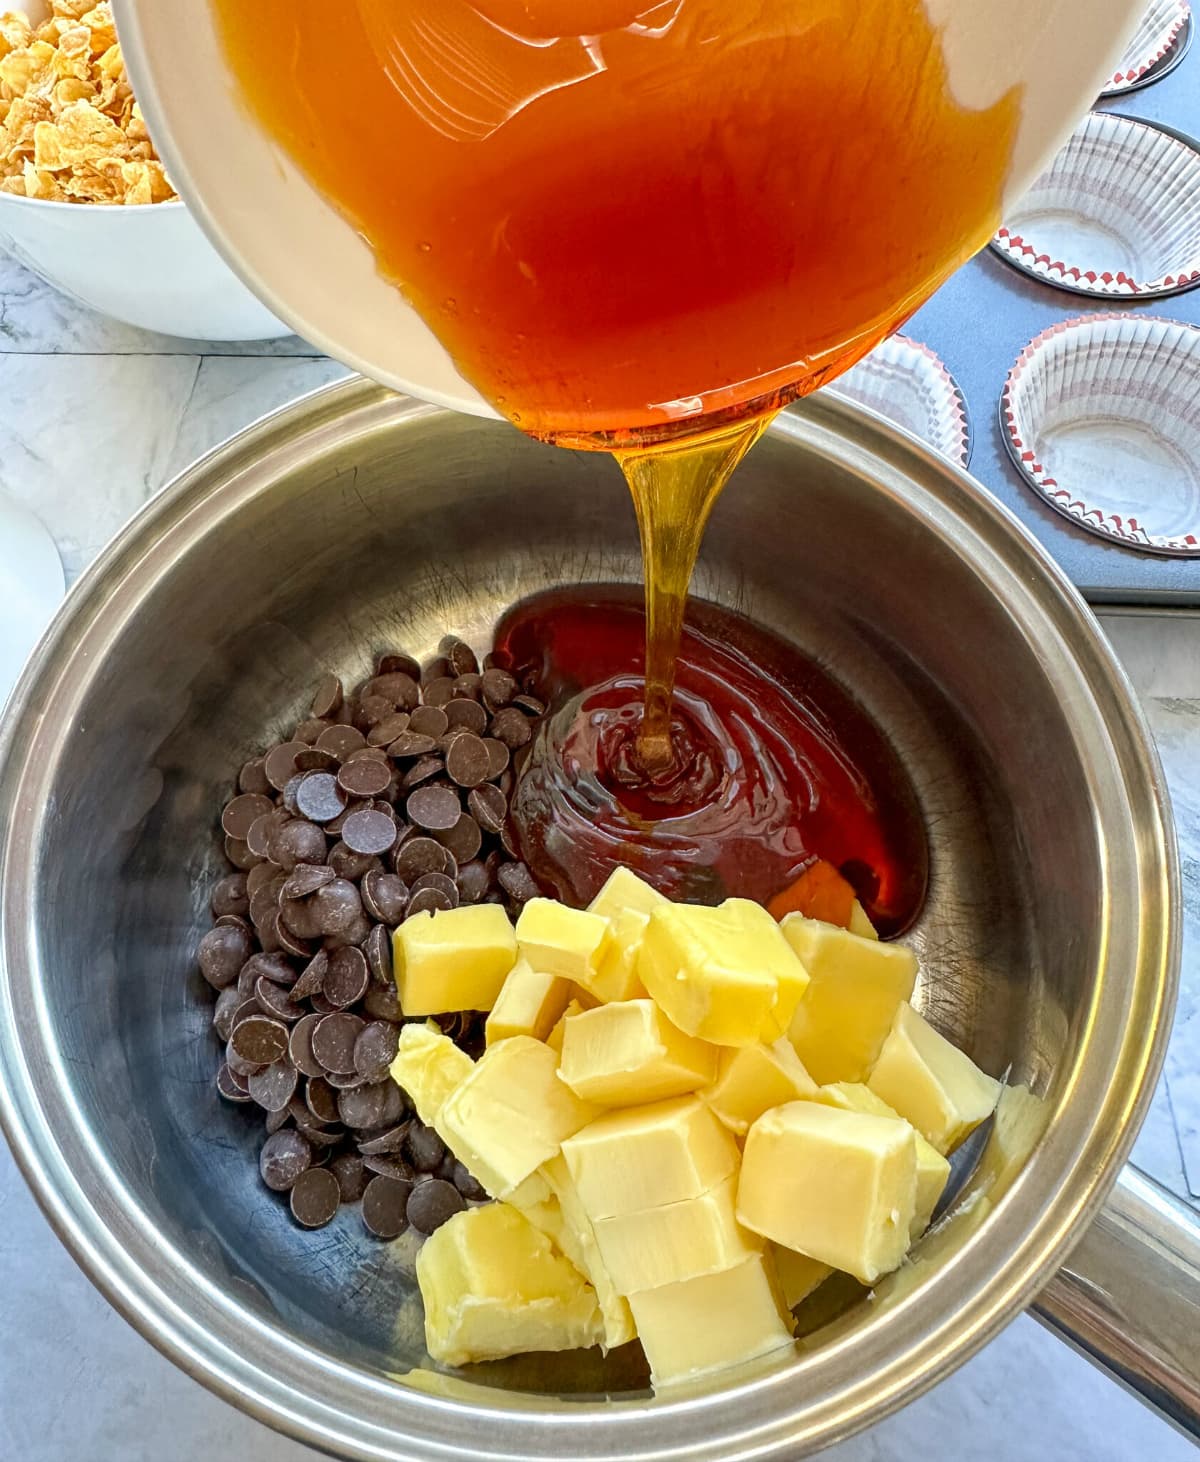 Golden syrup being poured over chocolate and butter in a saucepan